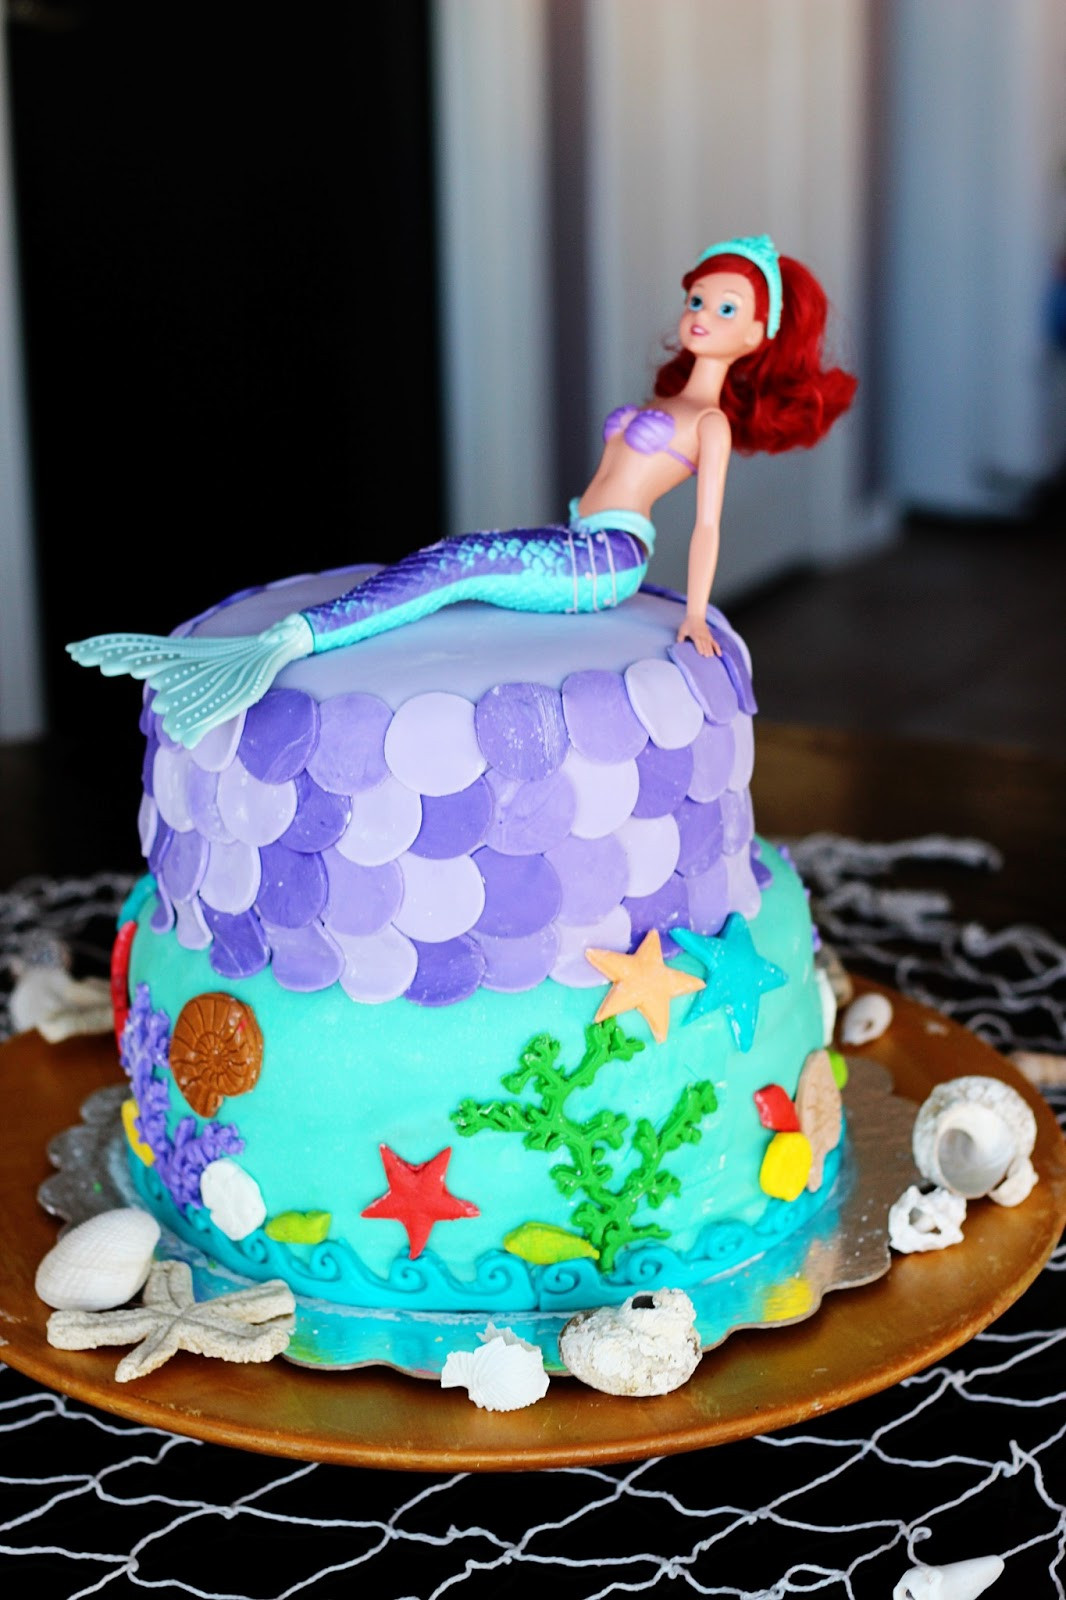 Mermaid Party Ideas 6 Year Old
 Sparklinbecks A Mermaid Party for A 3 Year old